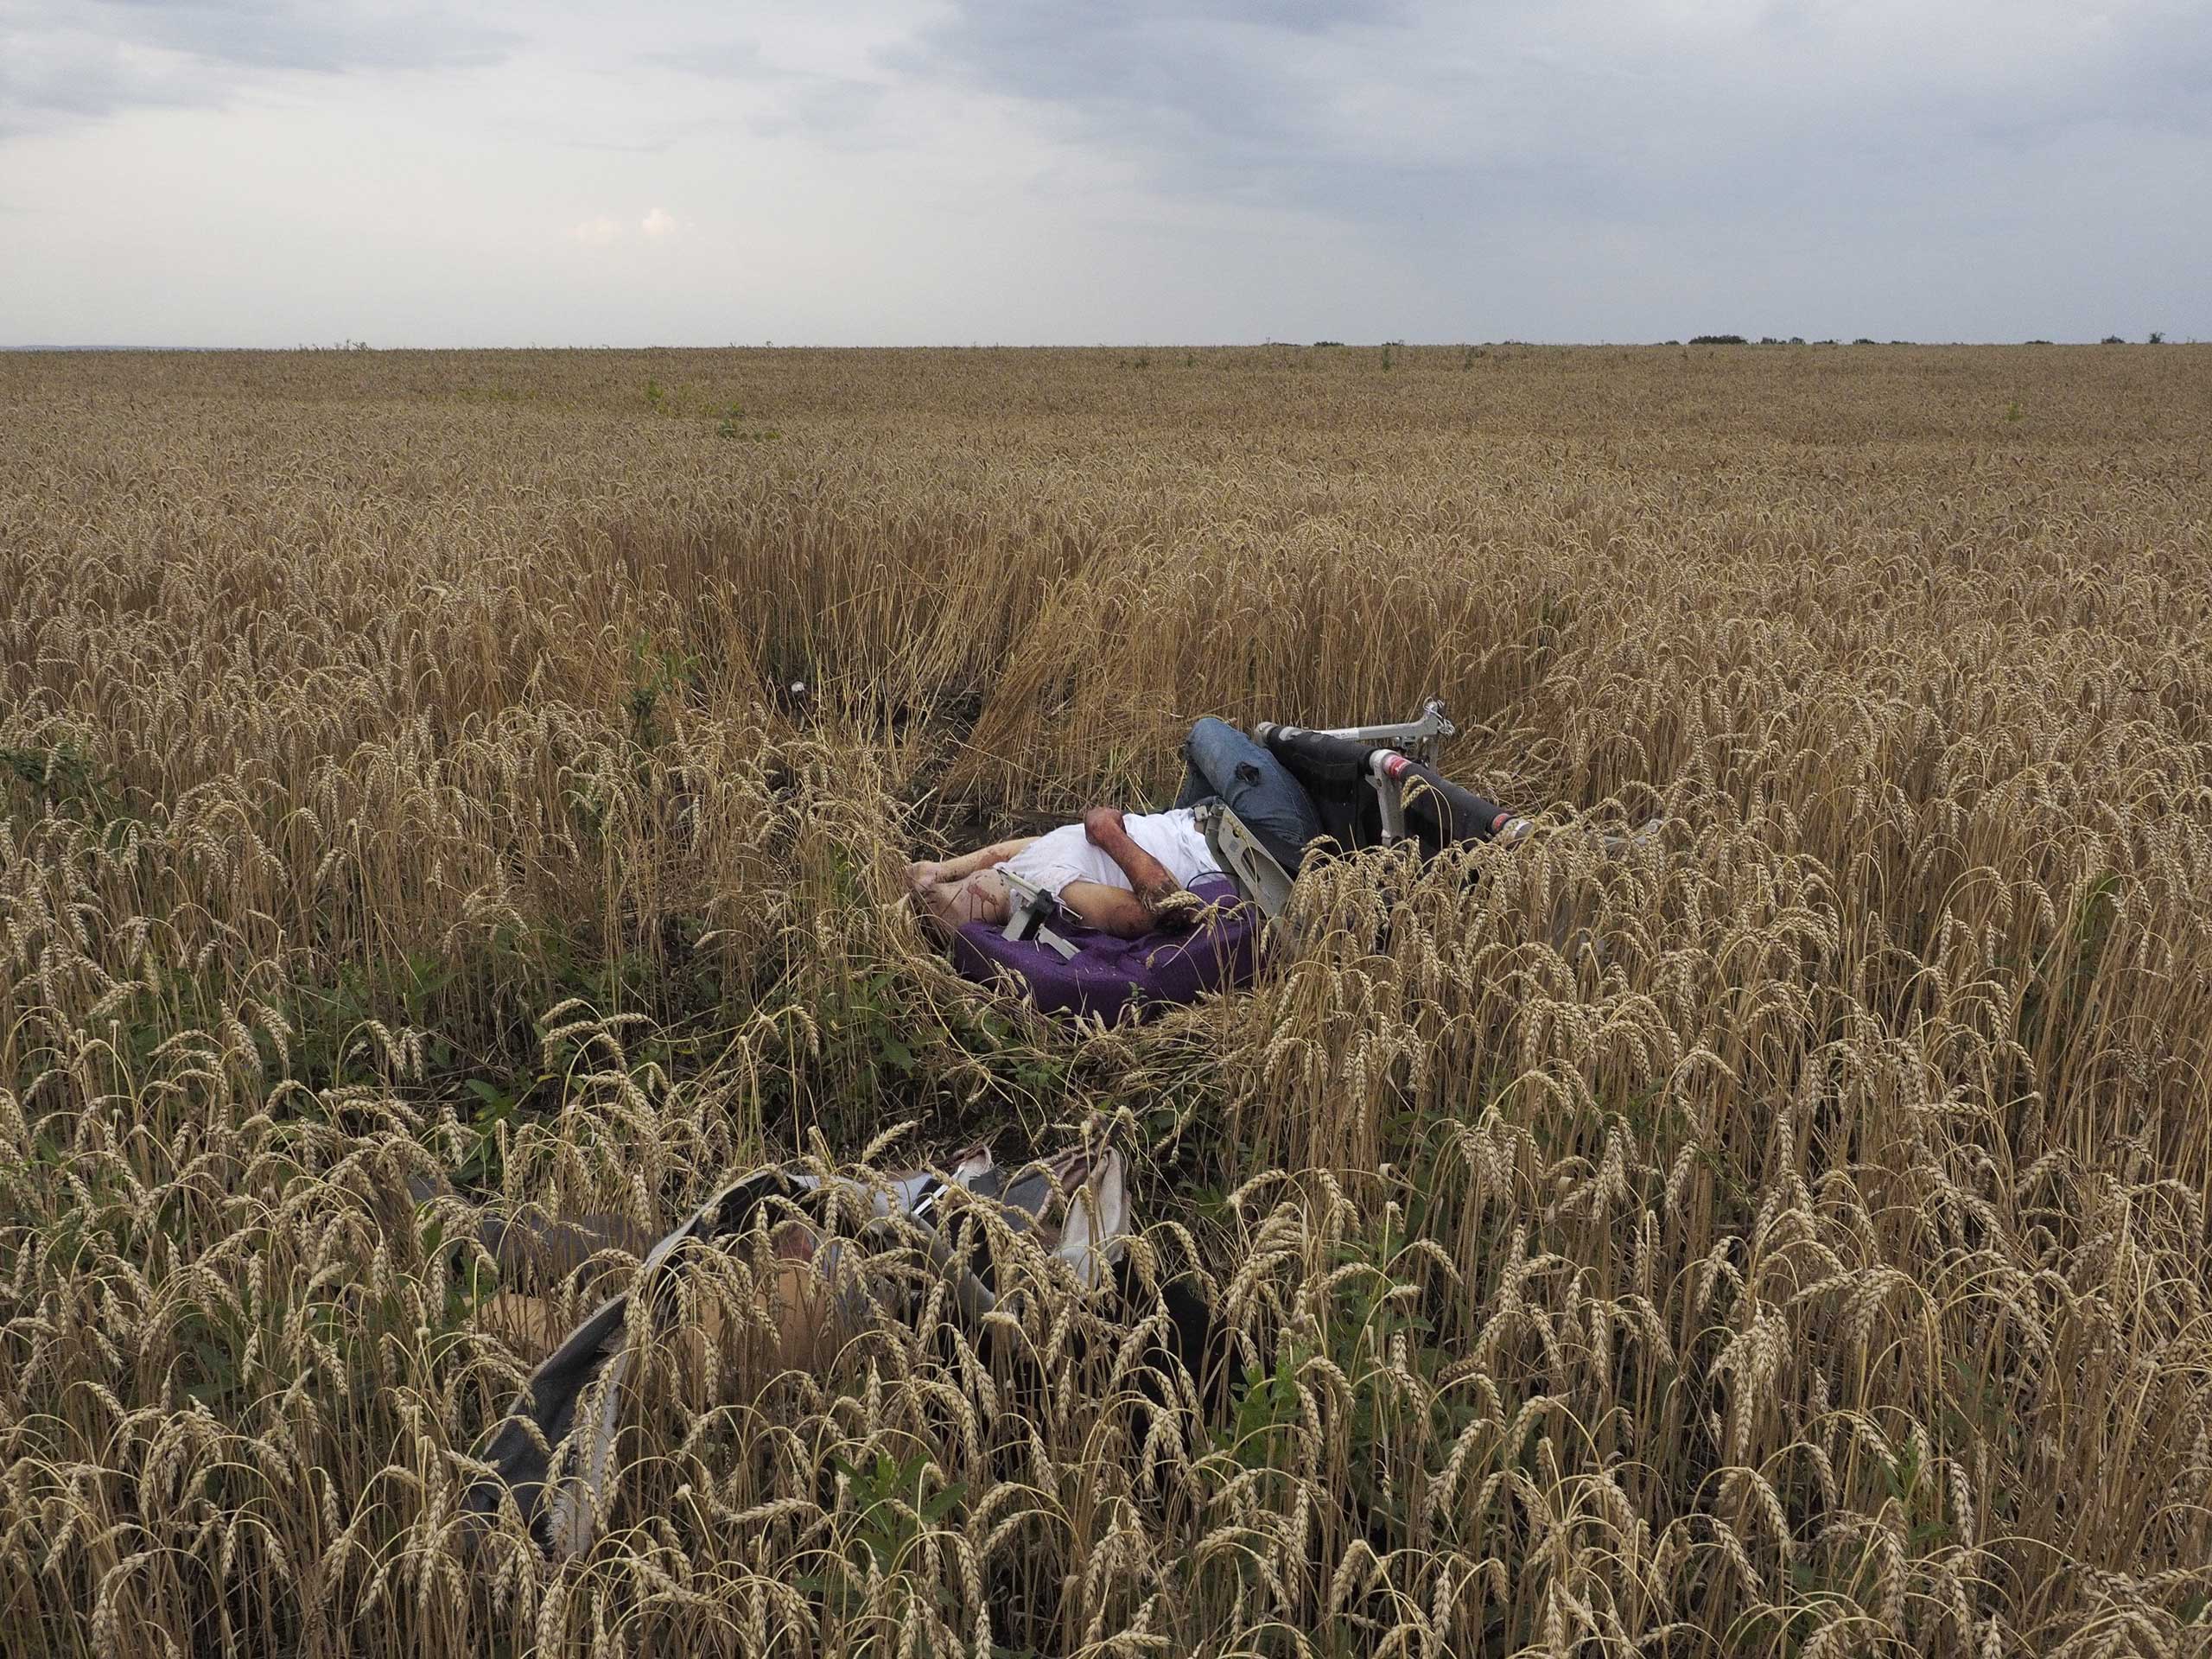 The remains of a passenger on board Malaysia Airlines flight MH17 that was shot over eastern Ukraine, July 17, 2014. From <a href="http://lightbox.time.com/2014/07/18/malaysia-airline-ukraine-crash-jerome-sessini/#1">"Malaysia Airlines Ukraine Crash: ‘Unreal’ Scenes from Photographer Jerome Sessini"</a> (Jerome Sessini—Magnum)